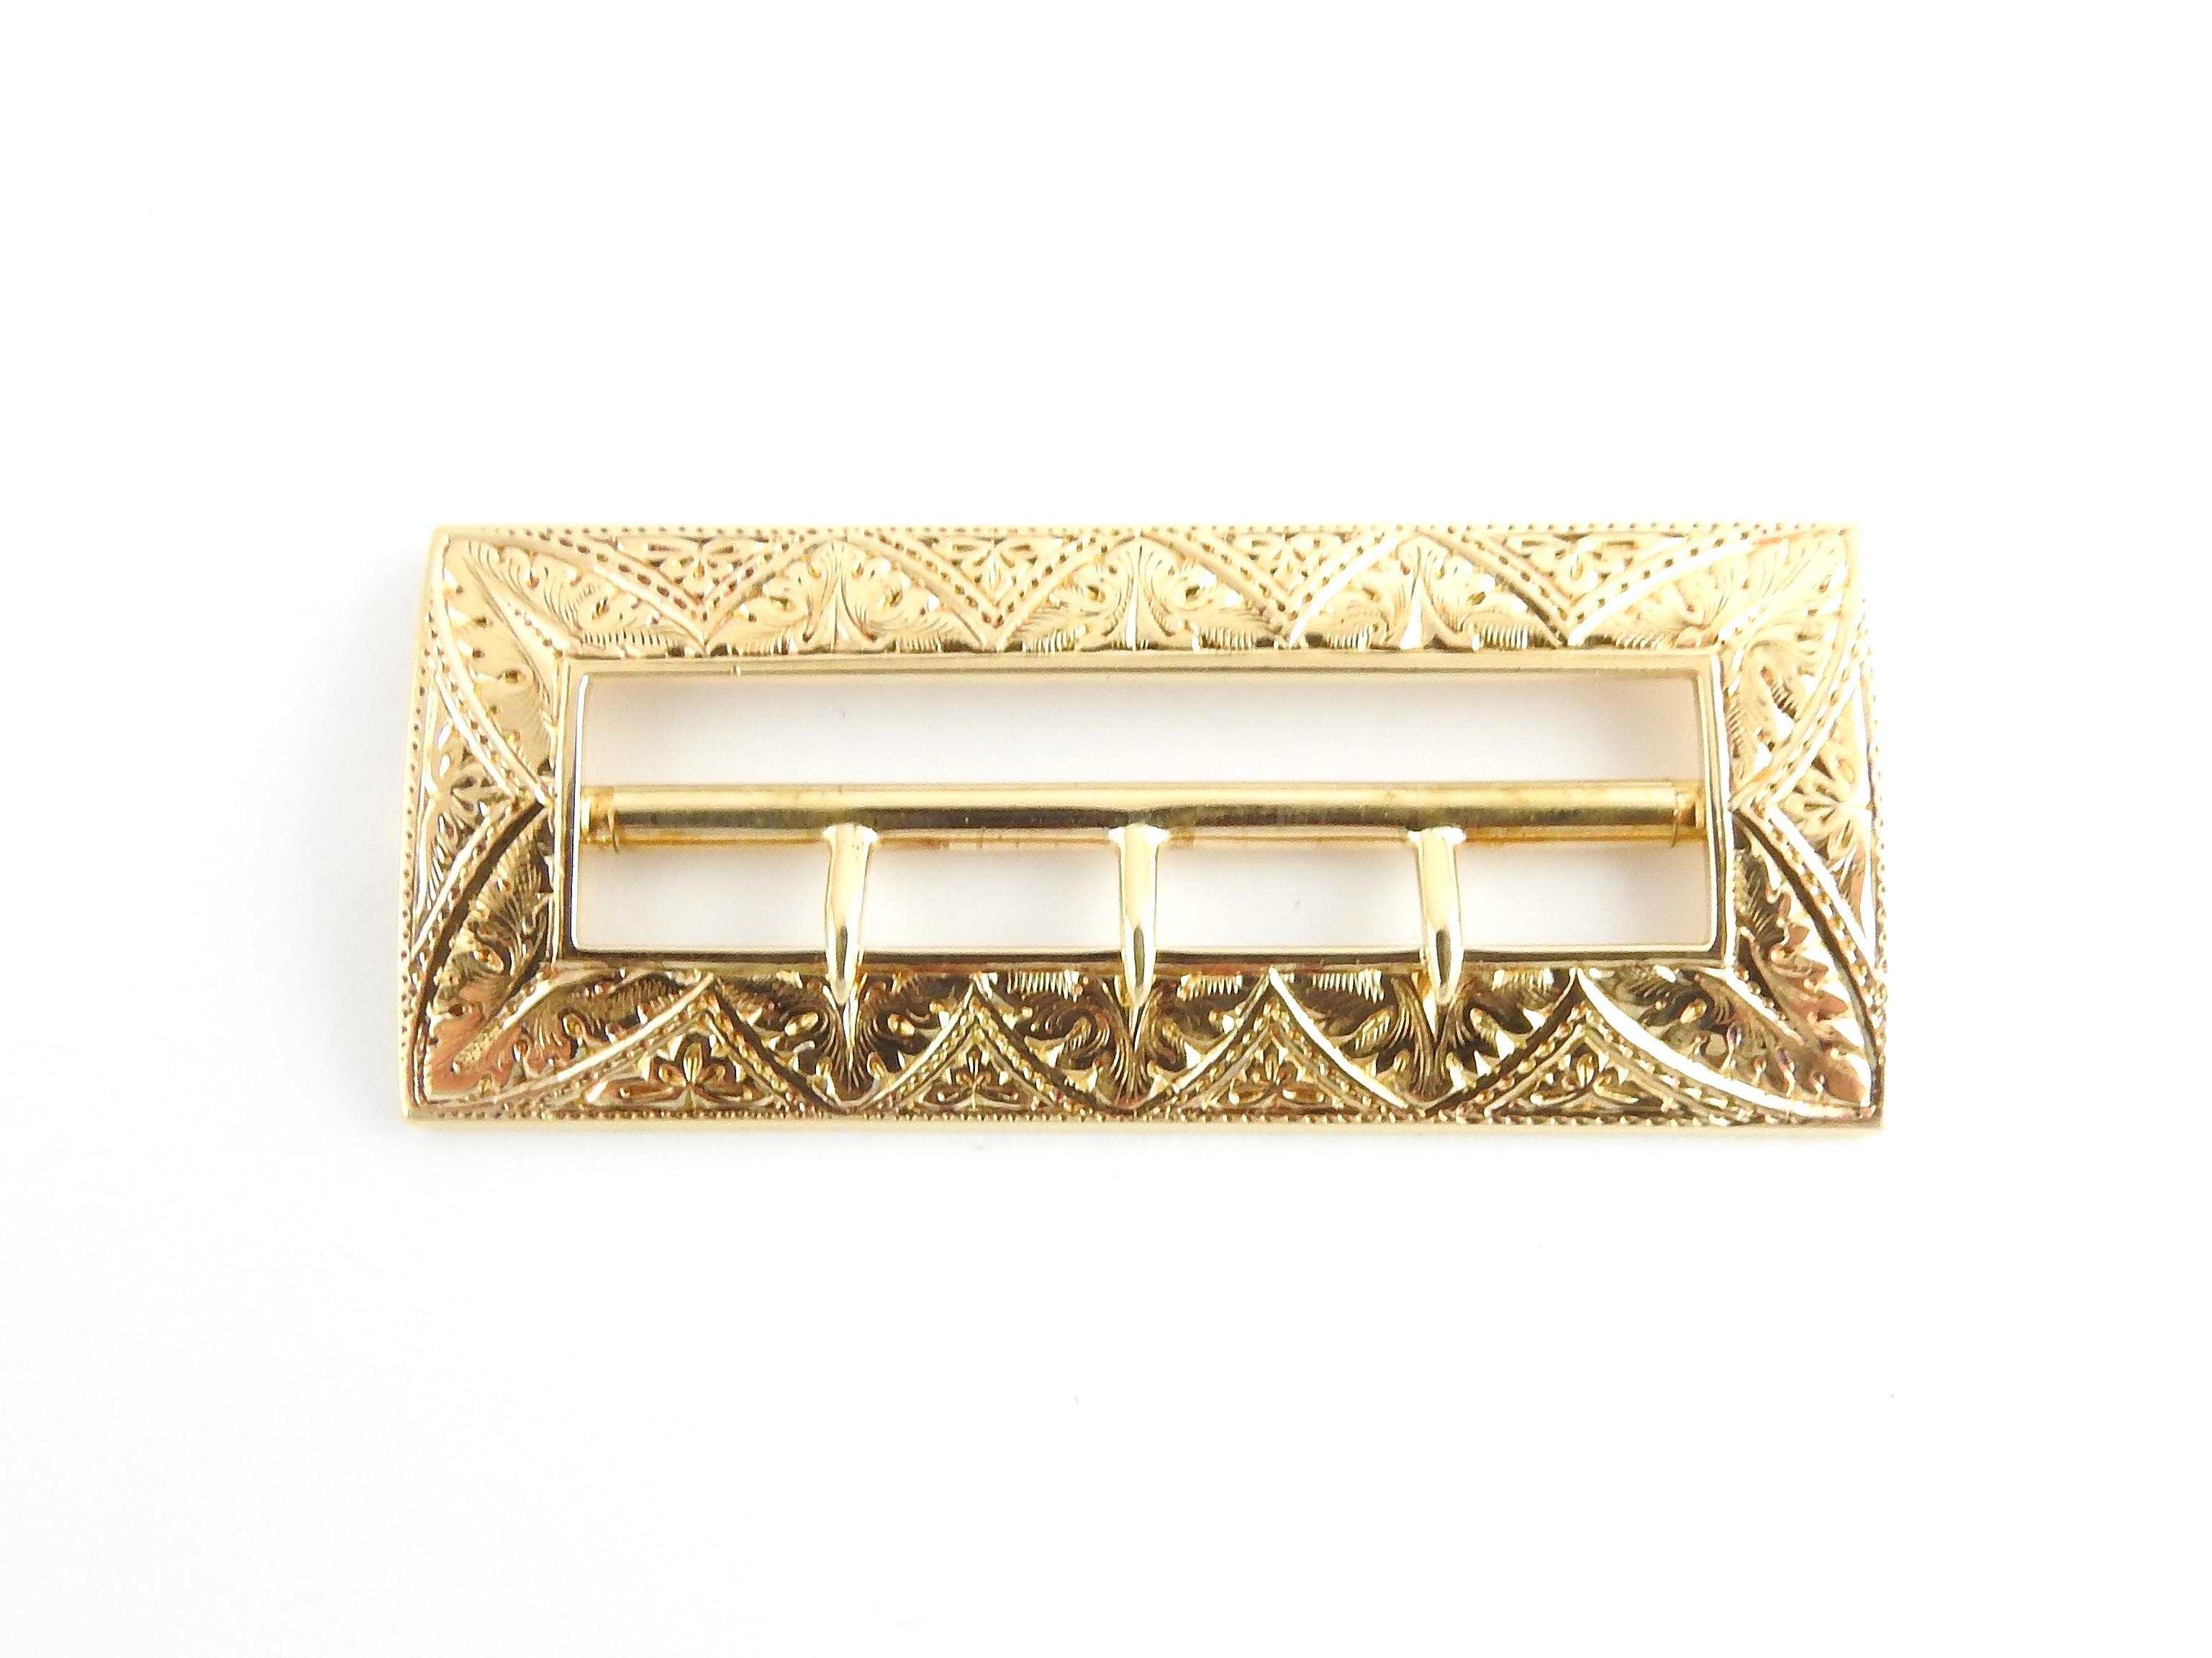 Vintage 14 Karat Yellow Gold Sash/Belt Buckle

This stunning 14K yellow gold buckle will add a touch of elegance to any ensemble!

Monogram reads 